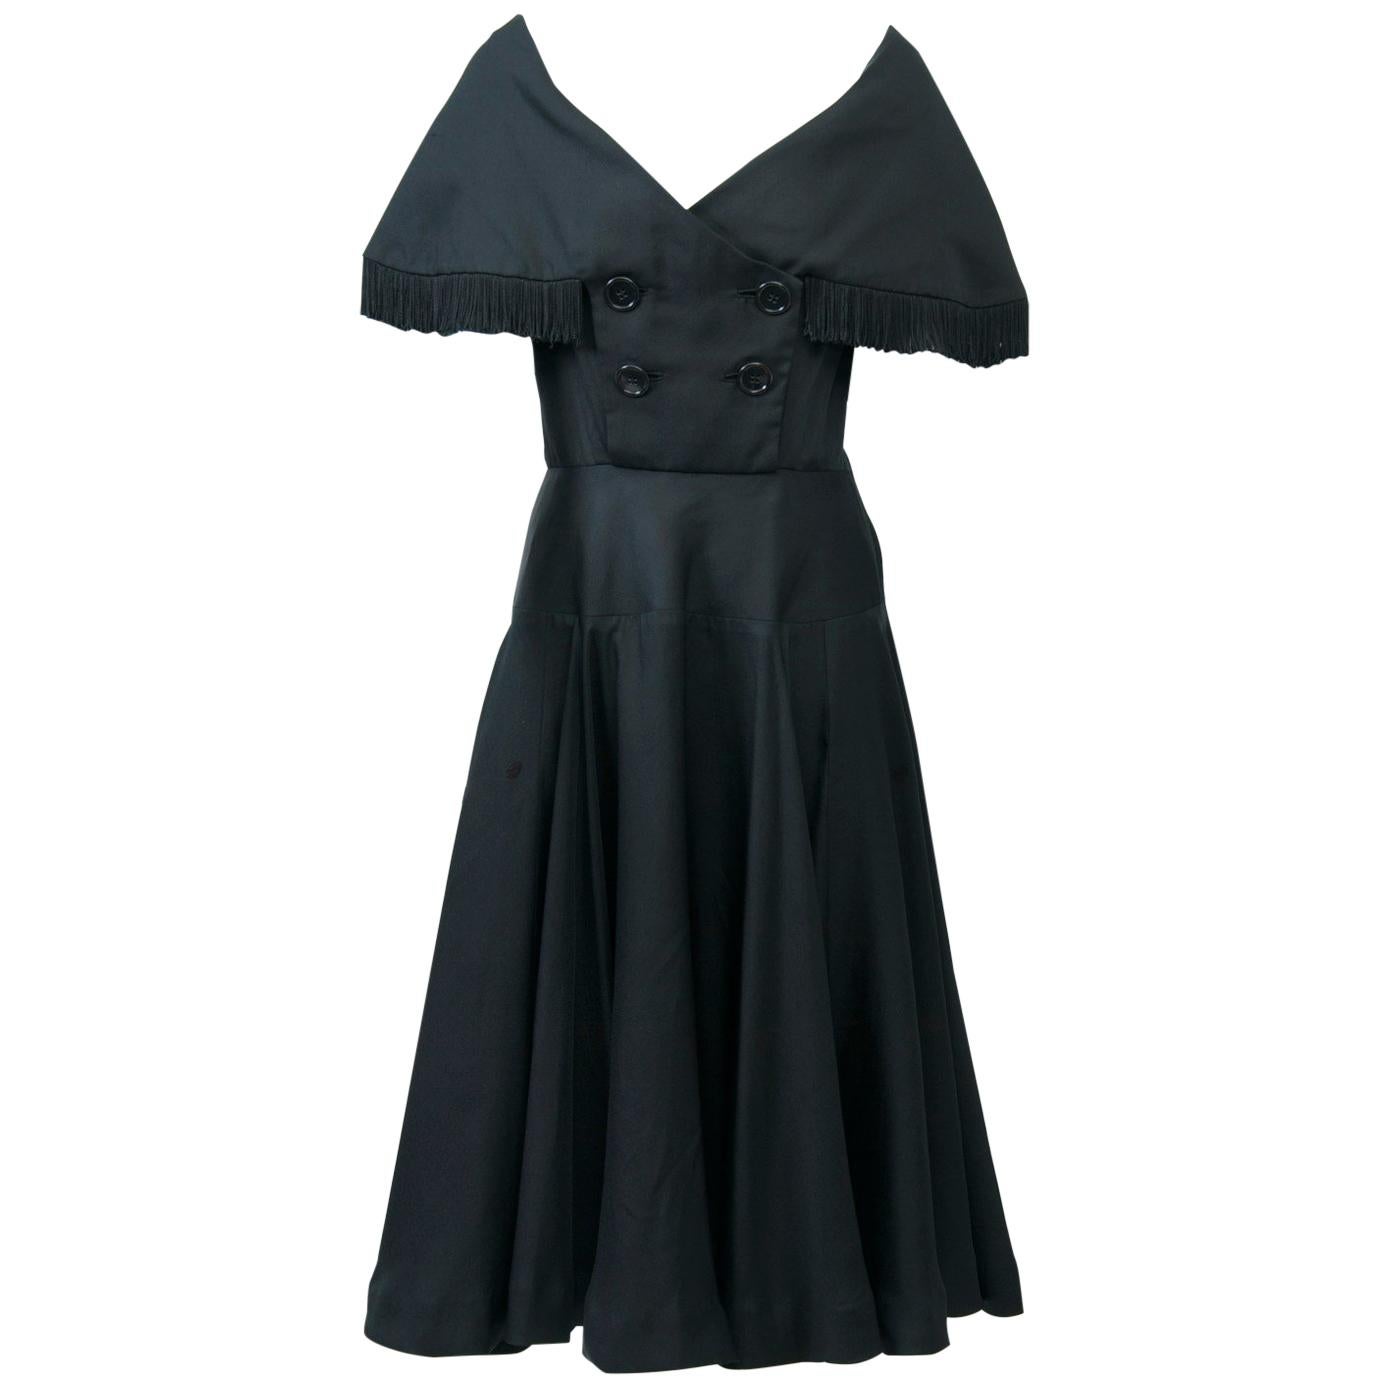 Jacques Fath 1950s Dress with Fringed Collar